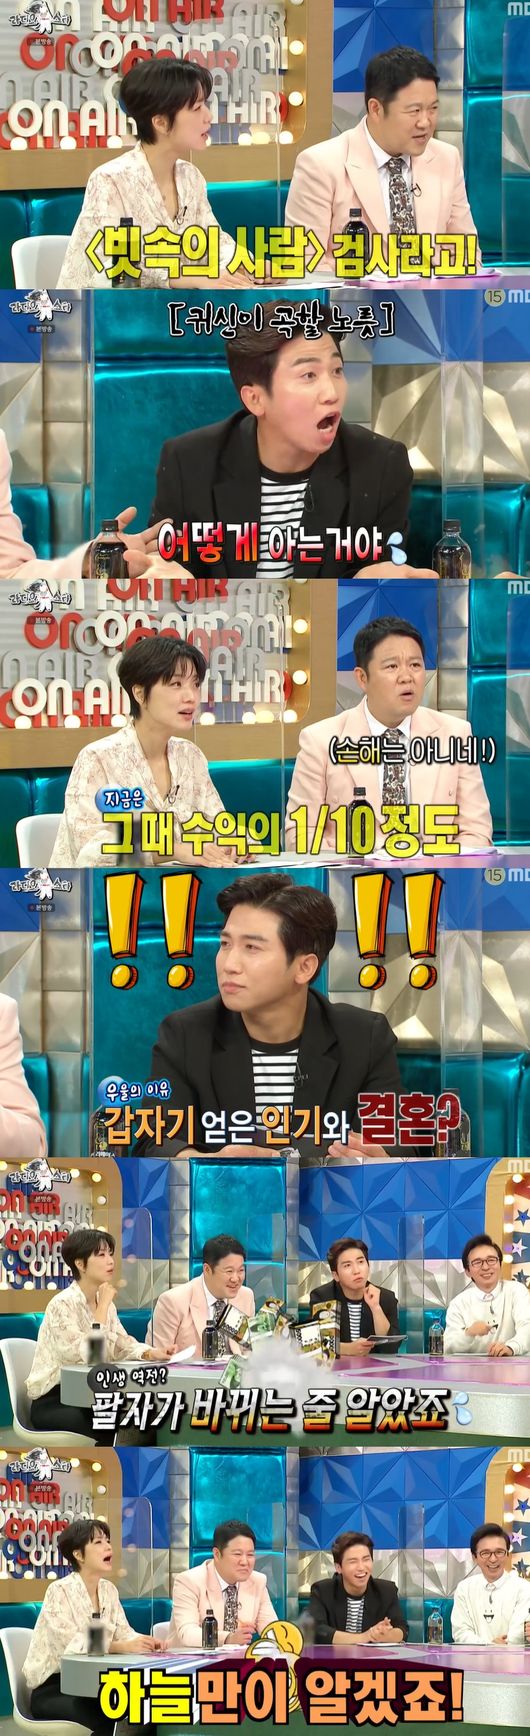 In Radio Star, Kim Gu mentioned her candid mind about divorce.On the 14th MBC Entertainment Radio Star, Yang Ji-zan, Song Eun, Kim Soo-yong and Kim Sang-hyuk appeared.On this day, Yang Jae-jin said, There are many people who have fantasies about marriage, and there are things to know before marriage. Kim Soo-yong said, I do not oppose marriage or encourage divorce. Kim Soo-yong was close-up,Kim Gu said, I felt that I was divorcing, but the process is painful. I can handle everything around me, but if I have to do it, I have to divorce.Yang Jae-jin said, Divorce is not to be happy, but to be less unhappy, to choose divorce to live.Kim Gu also said, I really wanted to live, and the national team tried to live (divorce). Kim Kook-jin shouted, Please tell me about you.In addition, Kim Gu mentioned the fight between the couple in the past, saying, I wanted to take a picture of the fight on my cell phone, and I wanted to see what we looked like (objectively). Yang Jae-jin said, Normally, taking out Camera is for collecting evidence.On the other hand, Kim Soo-yong recalled the conflict with Jin Jun-ha on the day, and found out that there was a conflict but it was not a fight.Unlike the former baseball team leader and captain, Jeong Jun-ha, he was a catcher. I avoided the ball by mistake and Jeong Jun-ha made a little bitter sound as a captain. I have not contacted him since then, but now I give you a mask.Radio Star broadcast screen capture